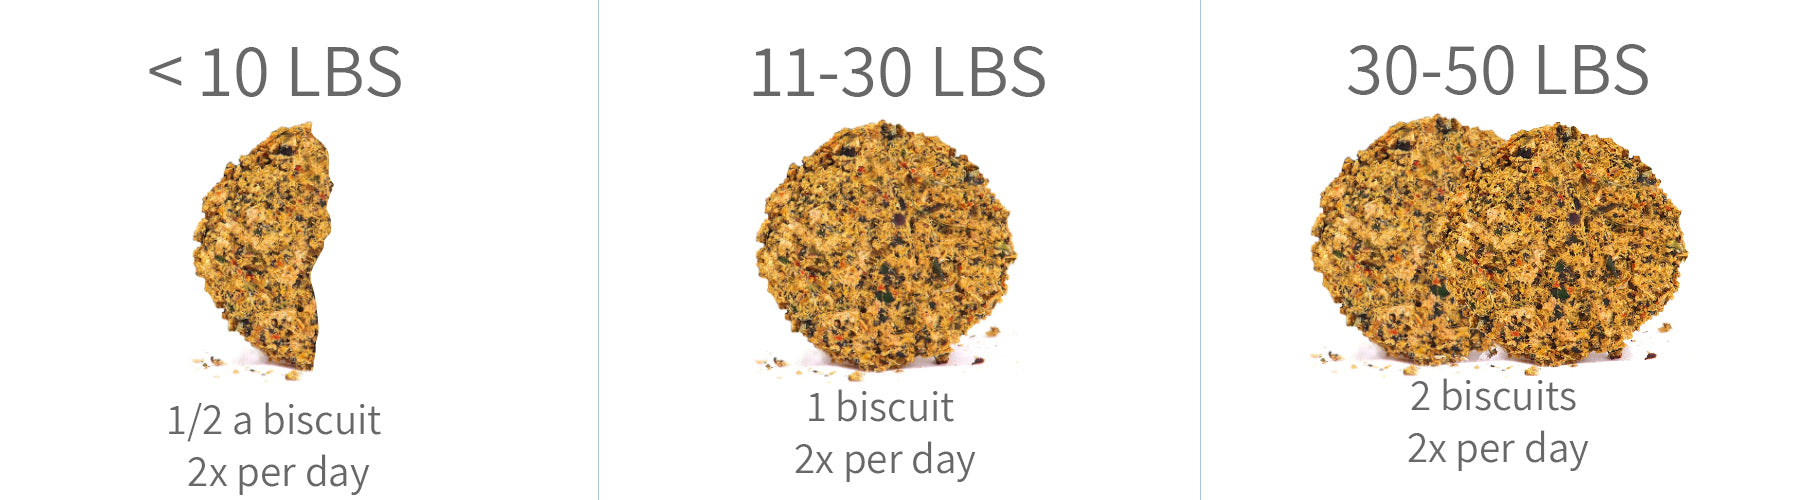 An image of biscuits. If a dog is less than 10 lbs, then feed them 1/2 a biscuit twice per day.  If a dog is 11-30 lbs, then feed them one full biscuit twice per day. If a dog is 30-50 lbs then feed them 2 biscuits twice per day.